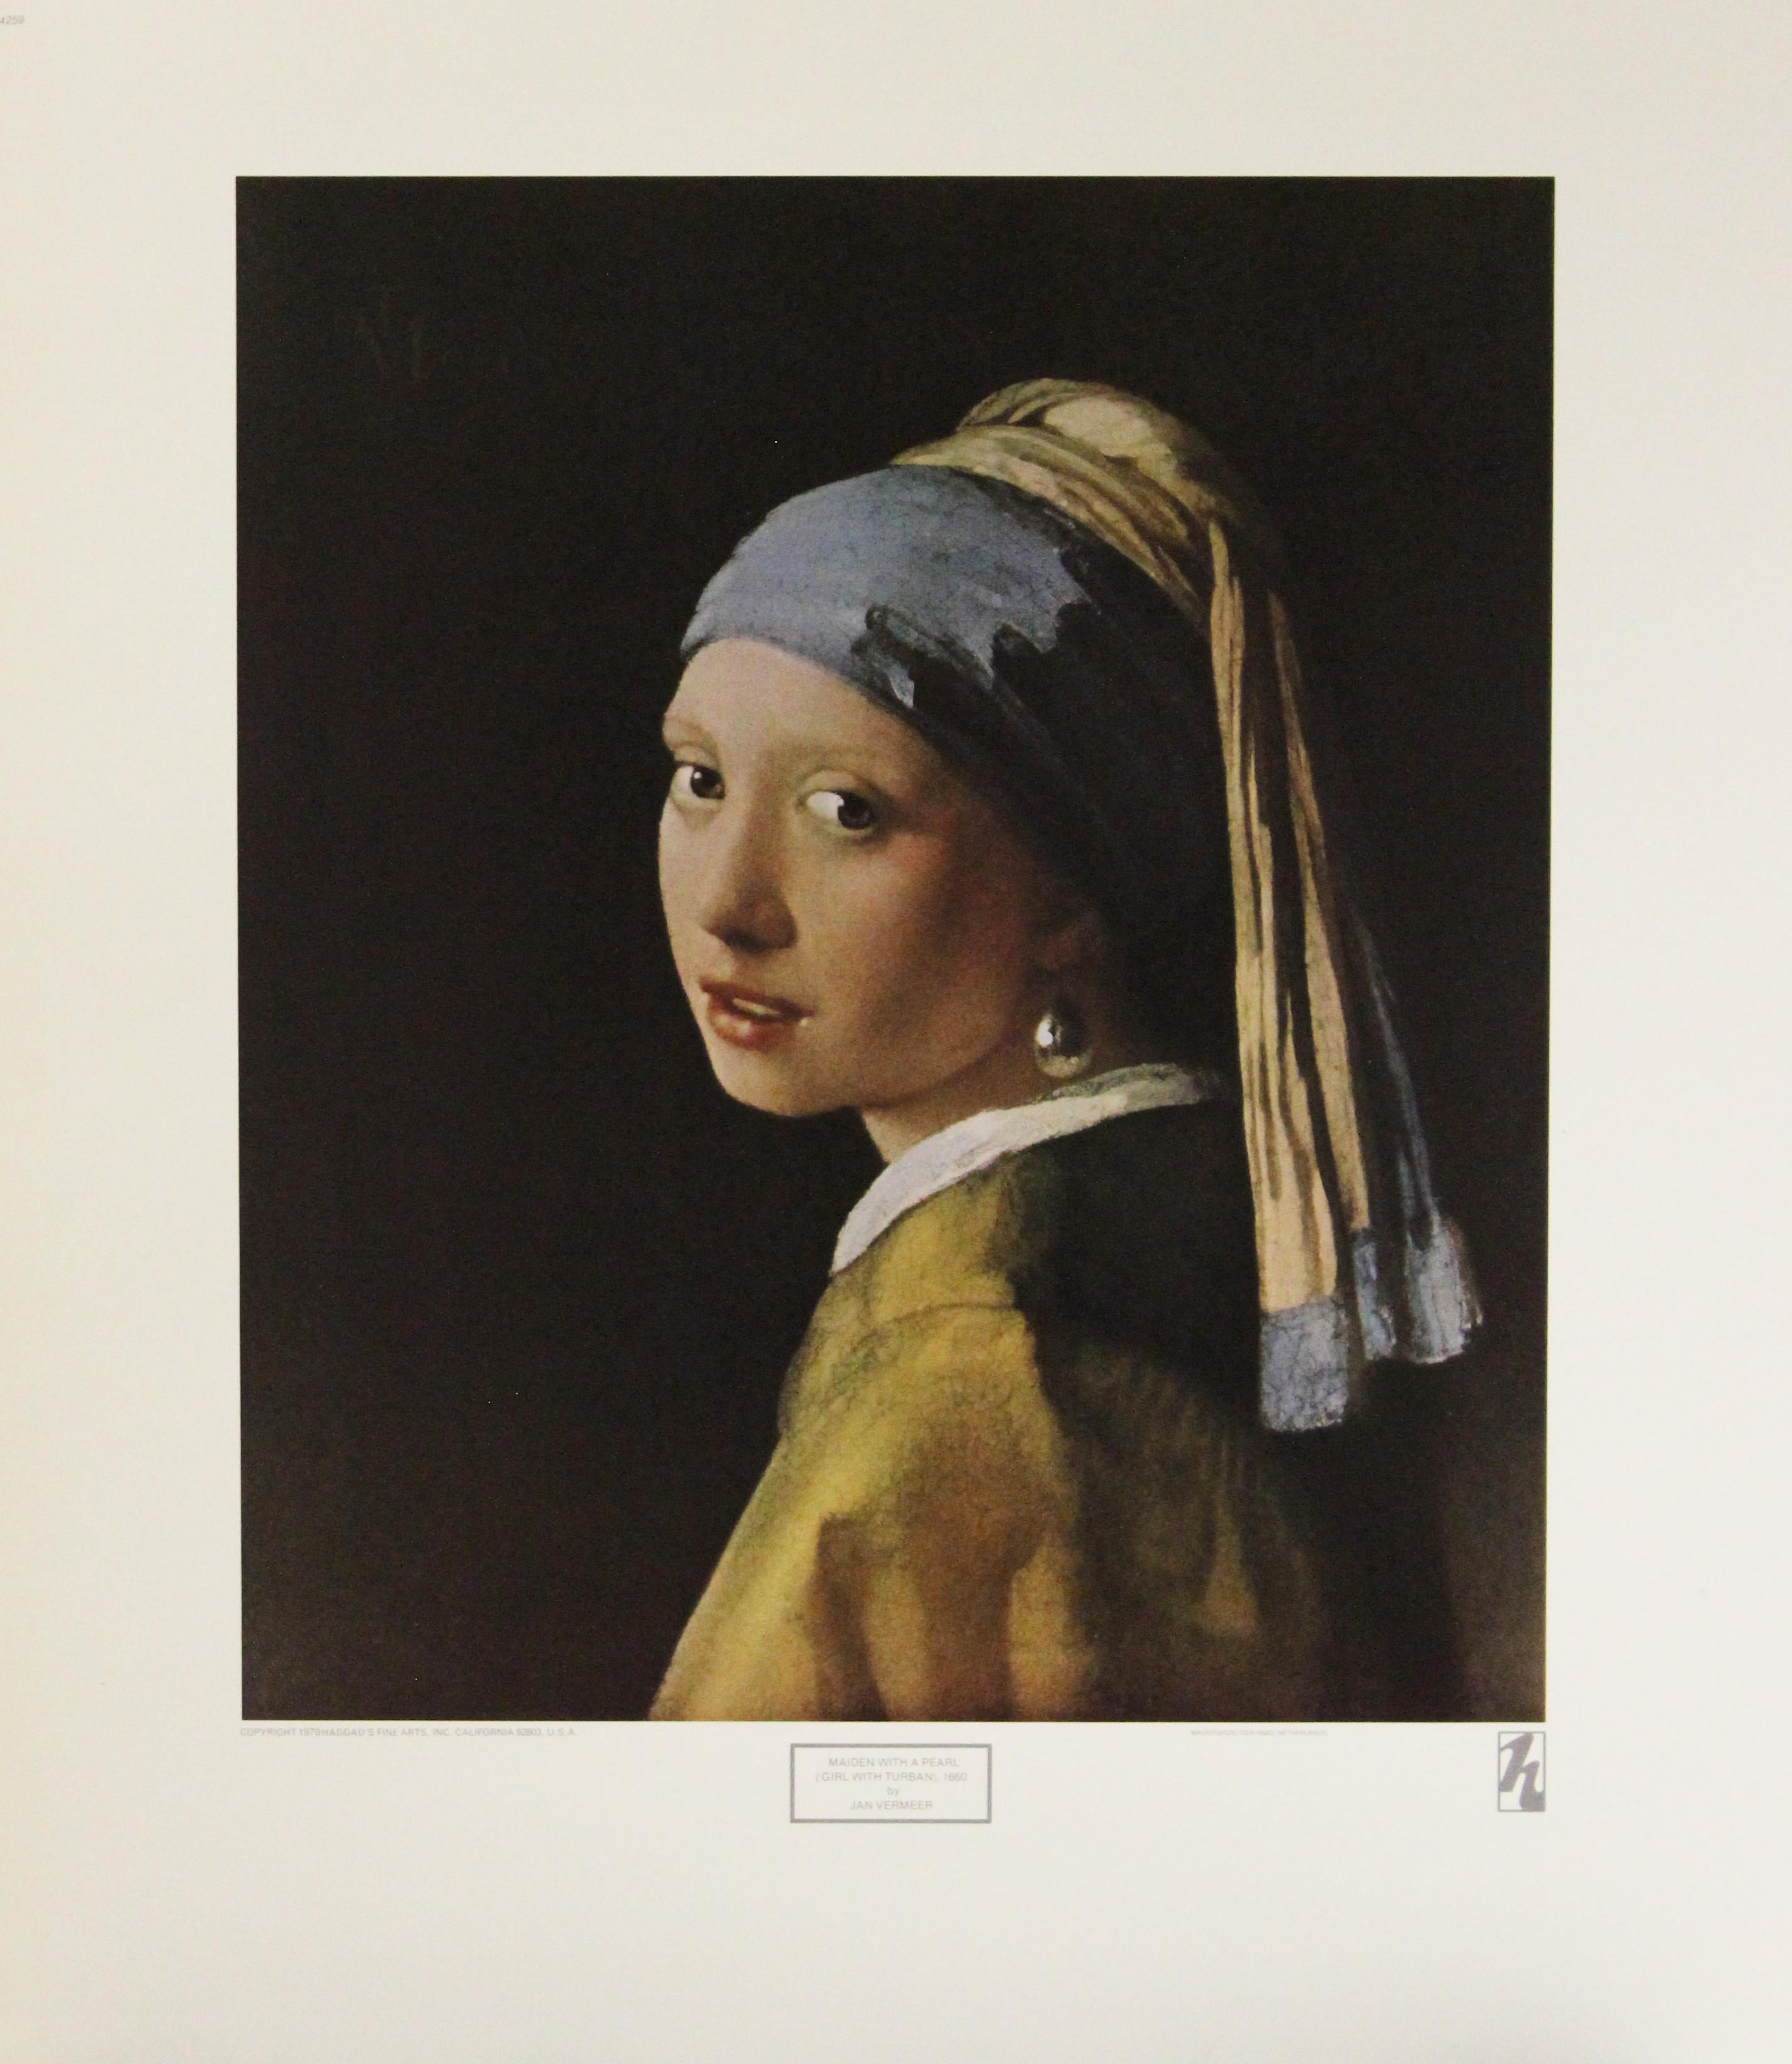 Jan Vermeer Portrait Print - Girl With Turban-Poster. Haddad's Fine Arts, Inc. Printed in the Netherlands. 